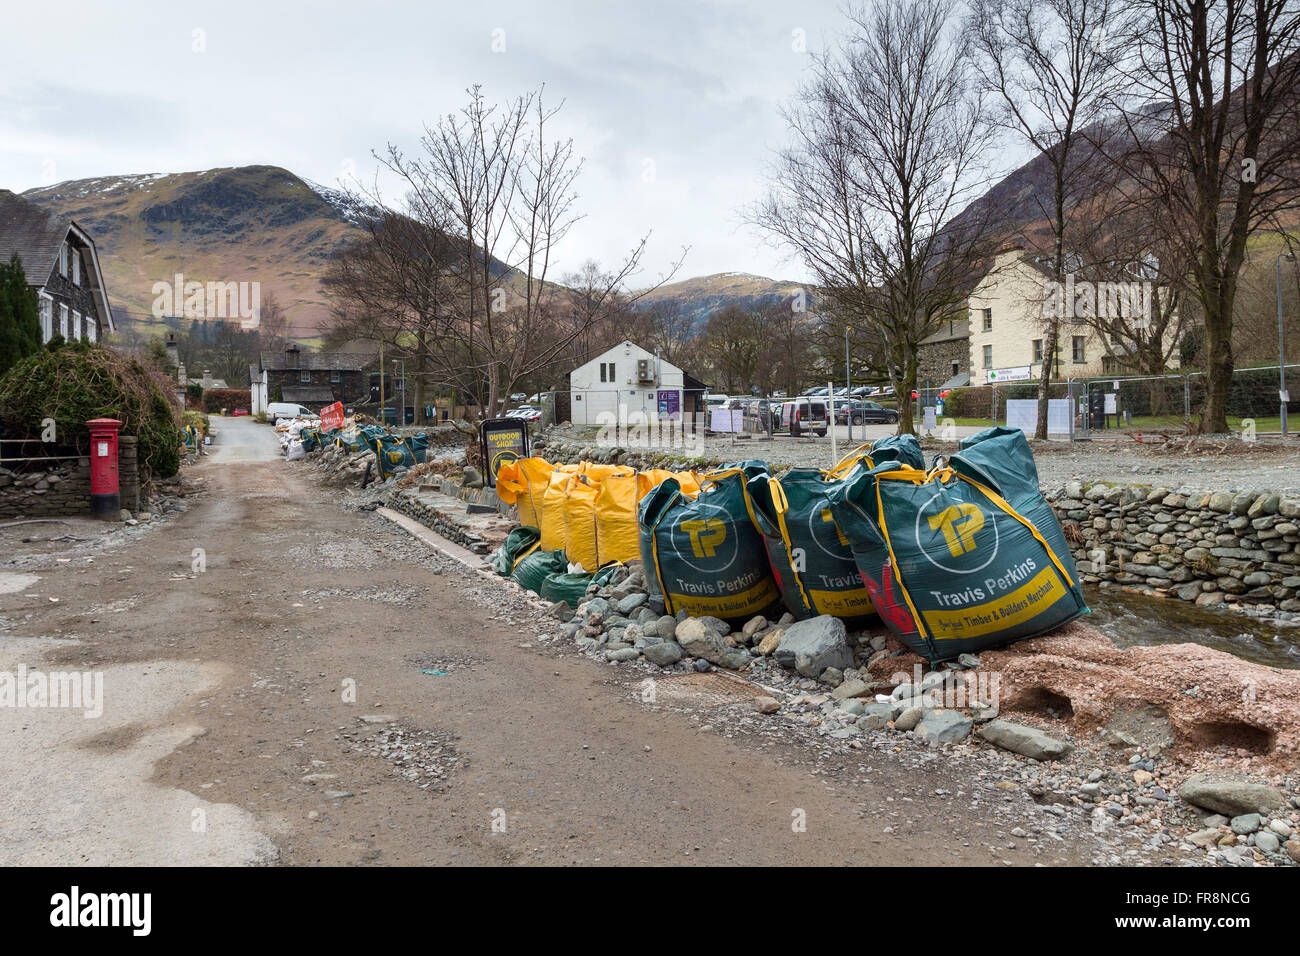 Emergency Makeshift Flood Defences Still Evident in the Village of Glenridding 3 Months after Flooding from Storm Desmond Caused Stock Photo